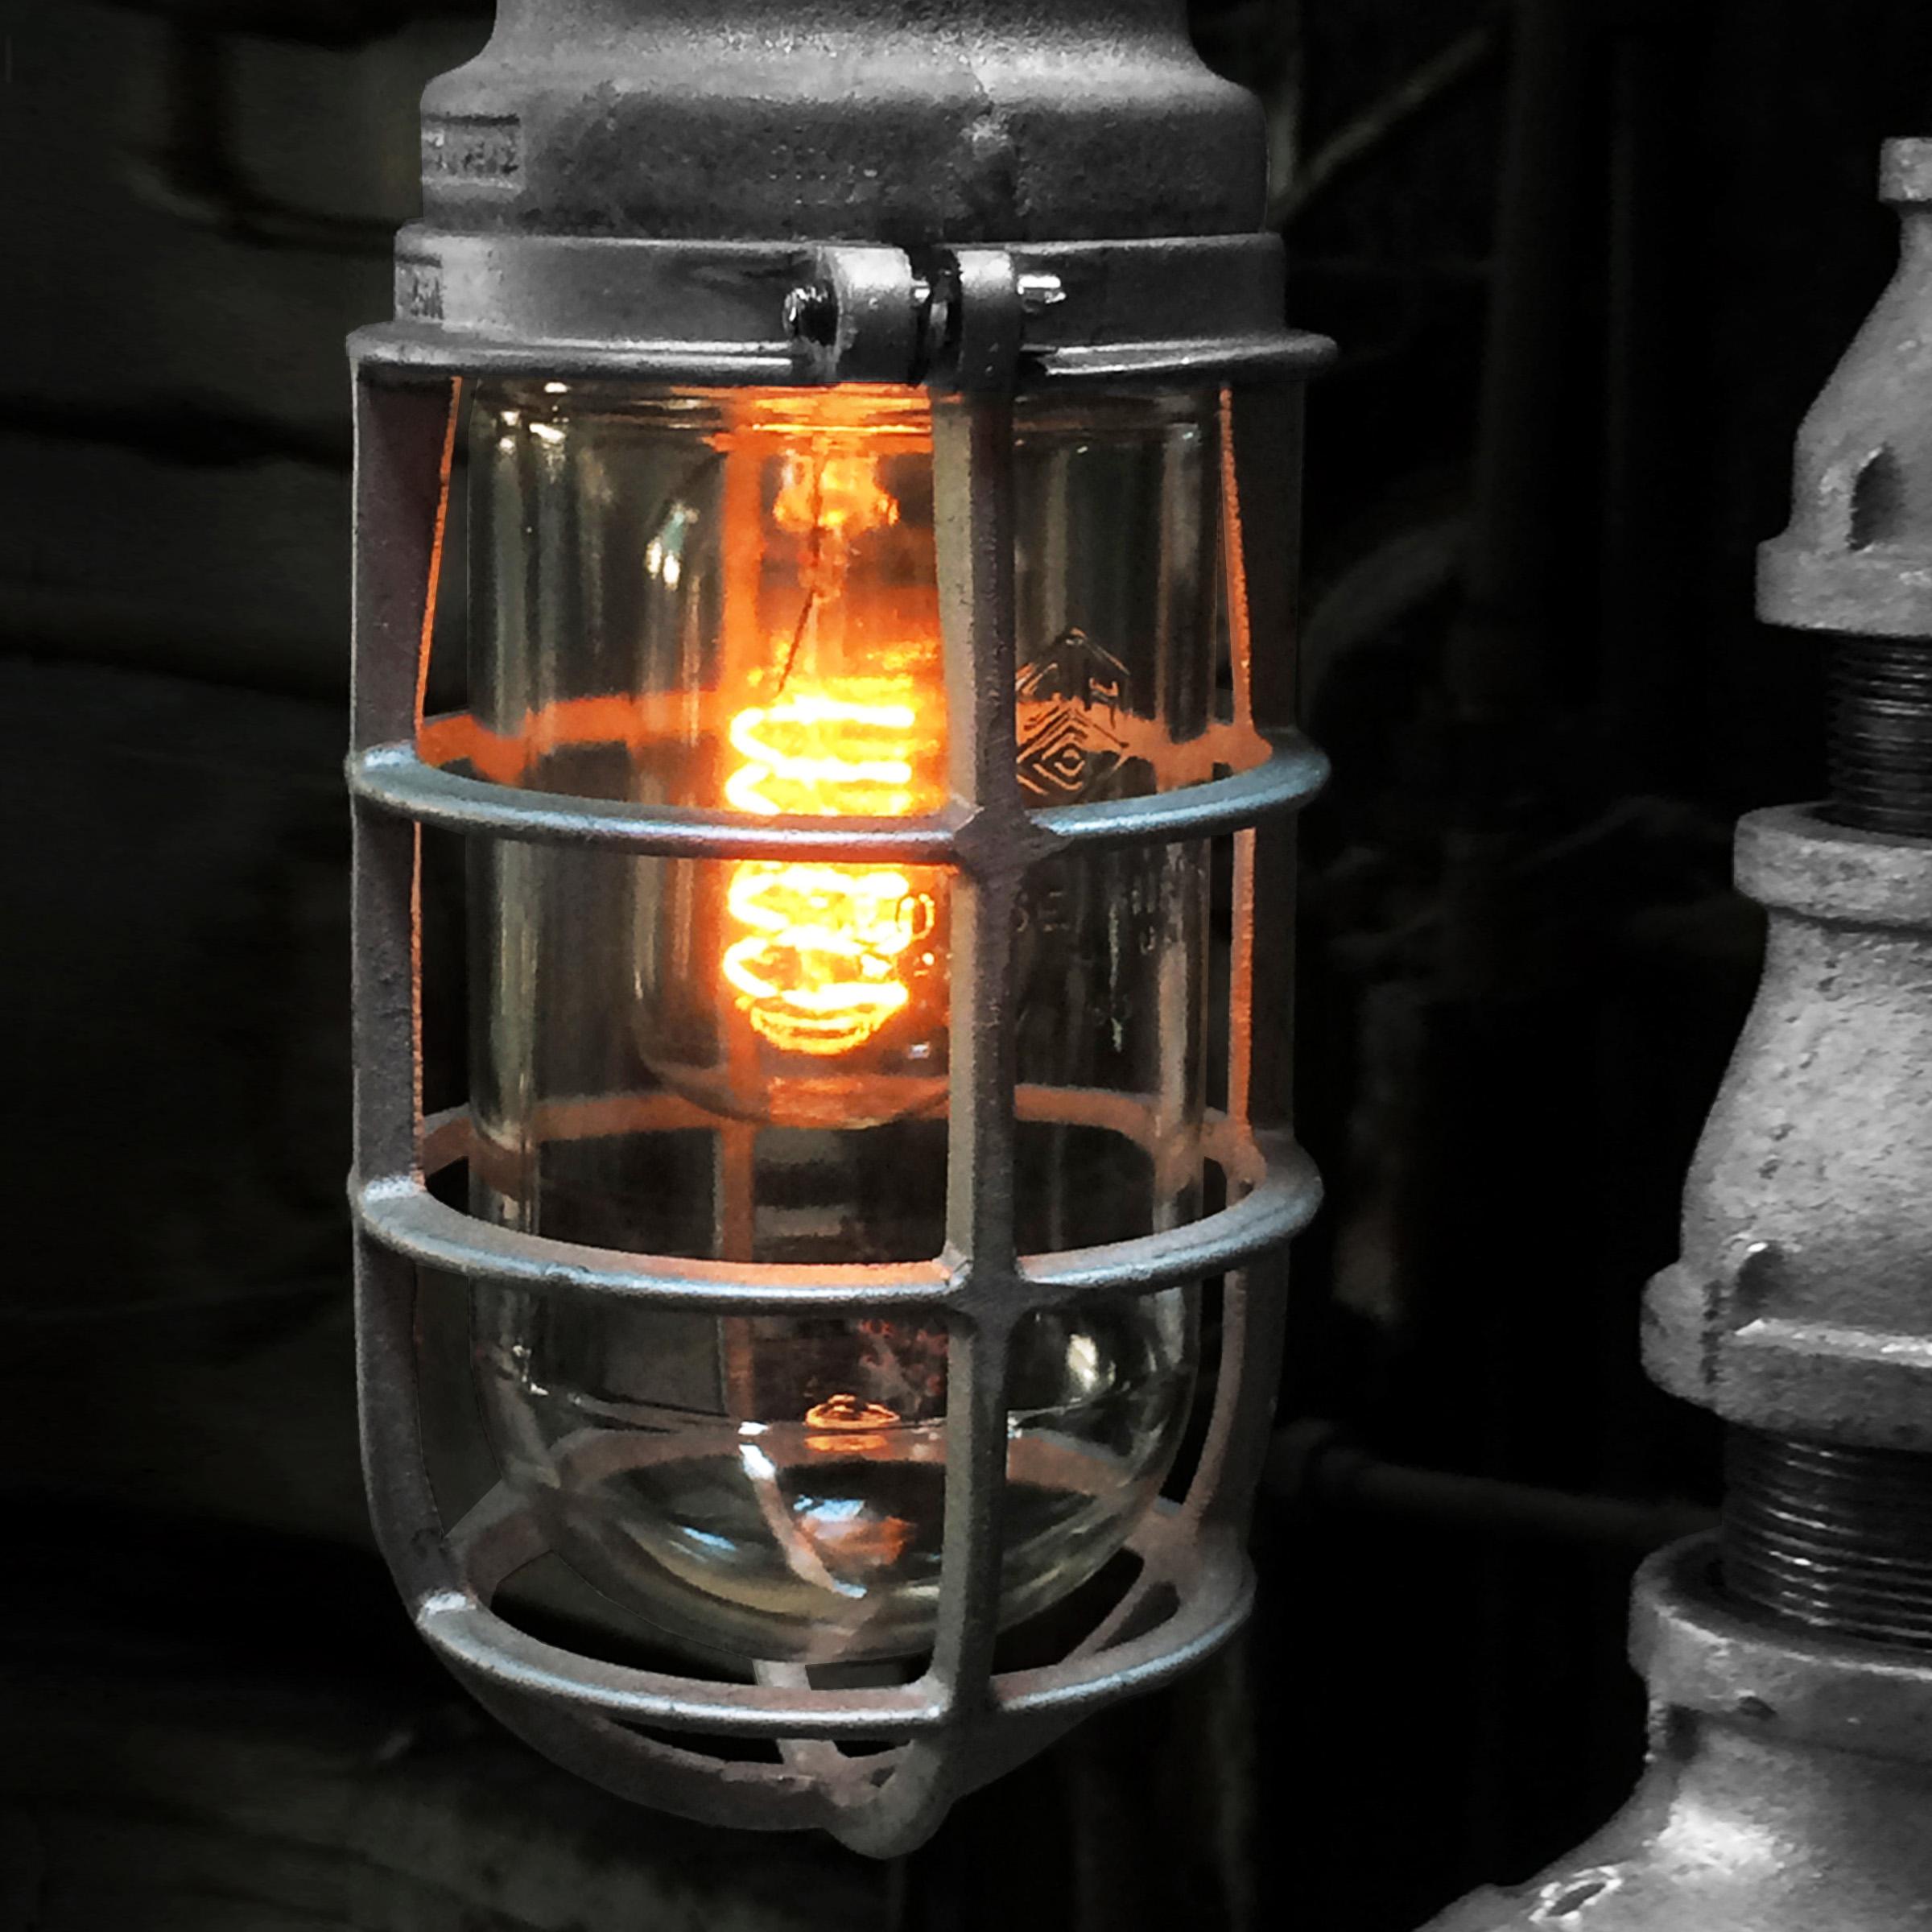 Modern Industrial Table Lamp - Industrial Decor - Crouse Hinds Industrial Light In New Condition For Sale In Bridgeport, PA